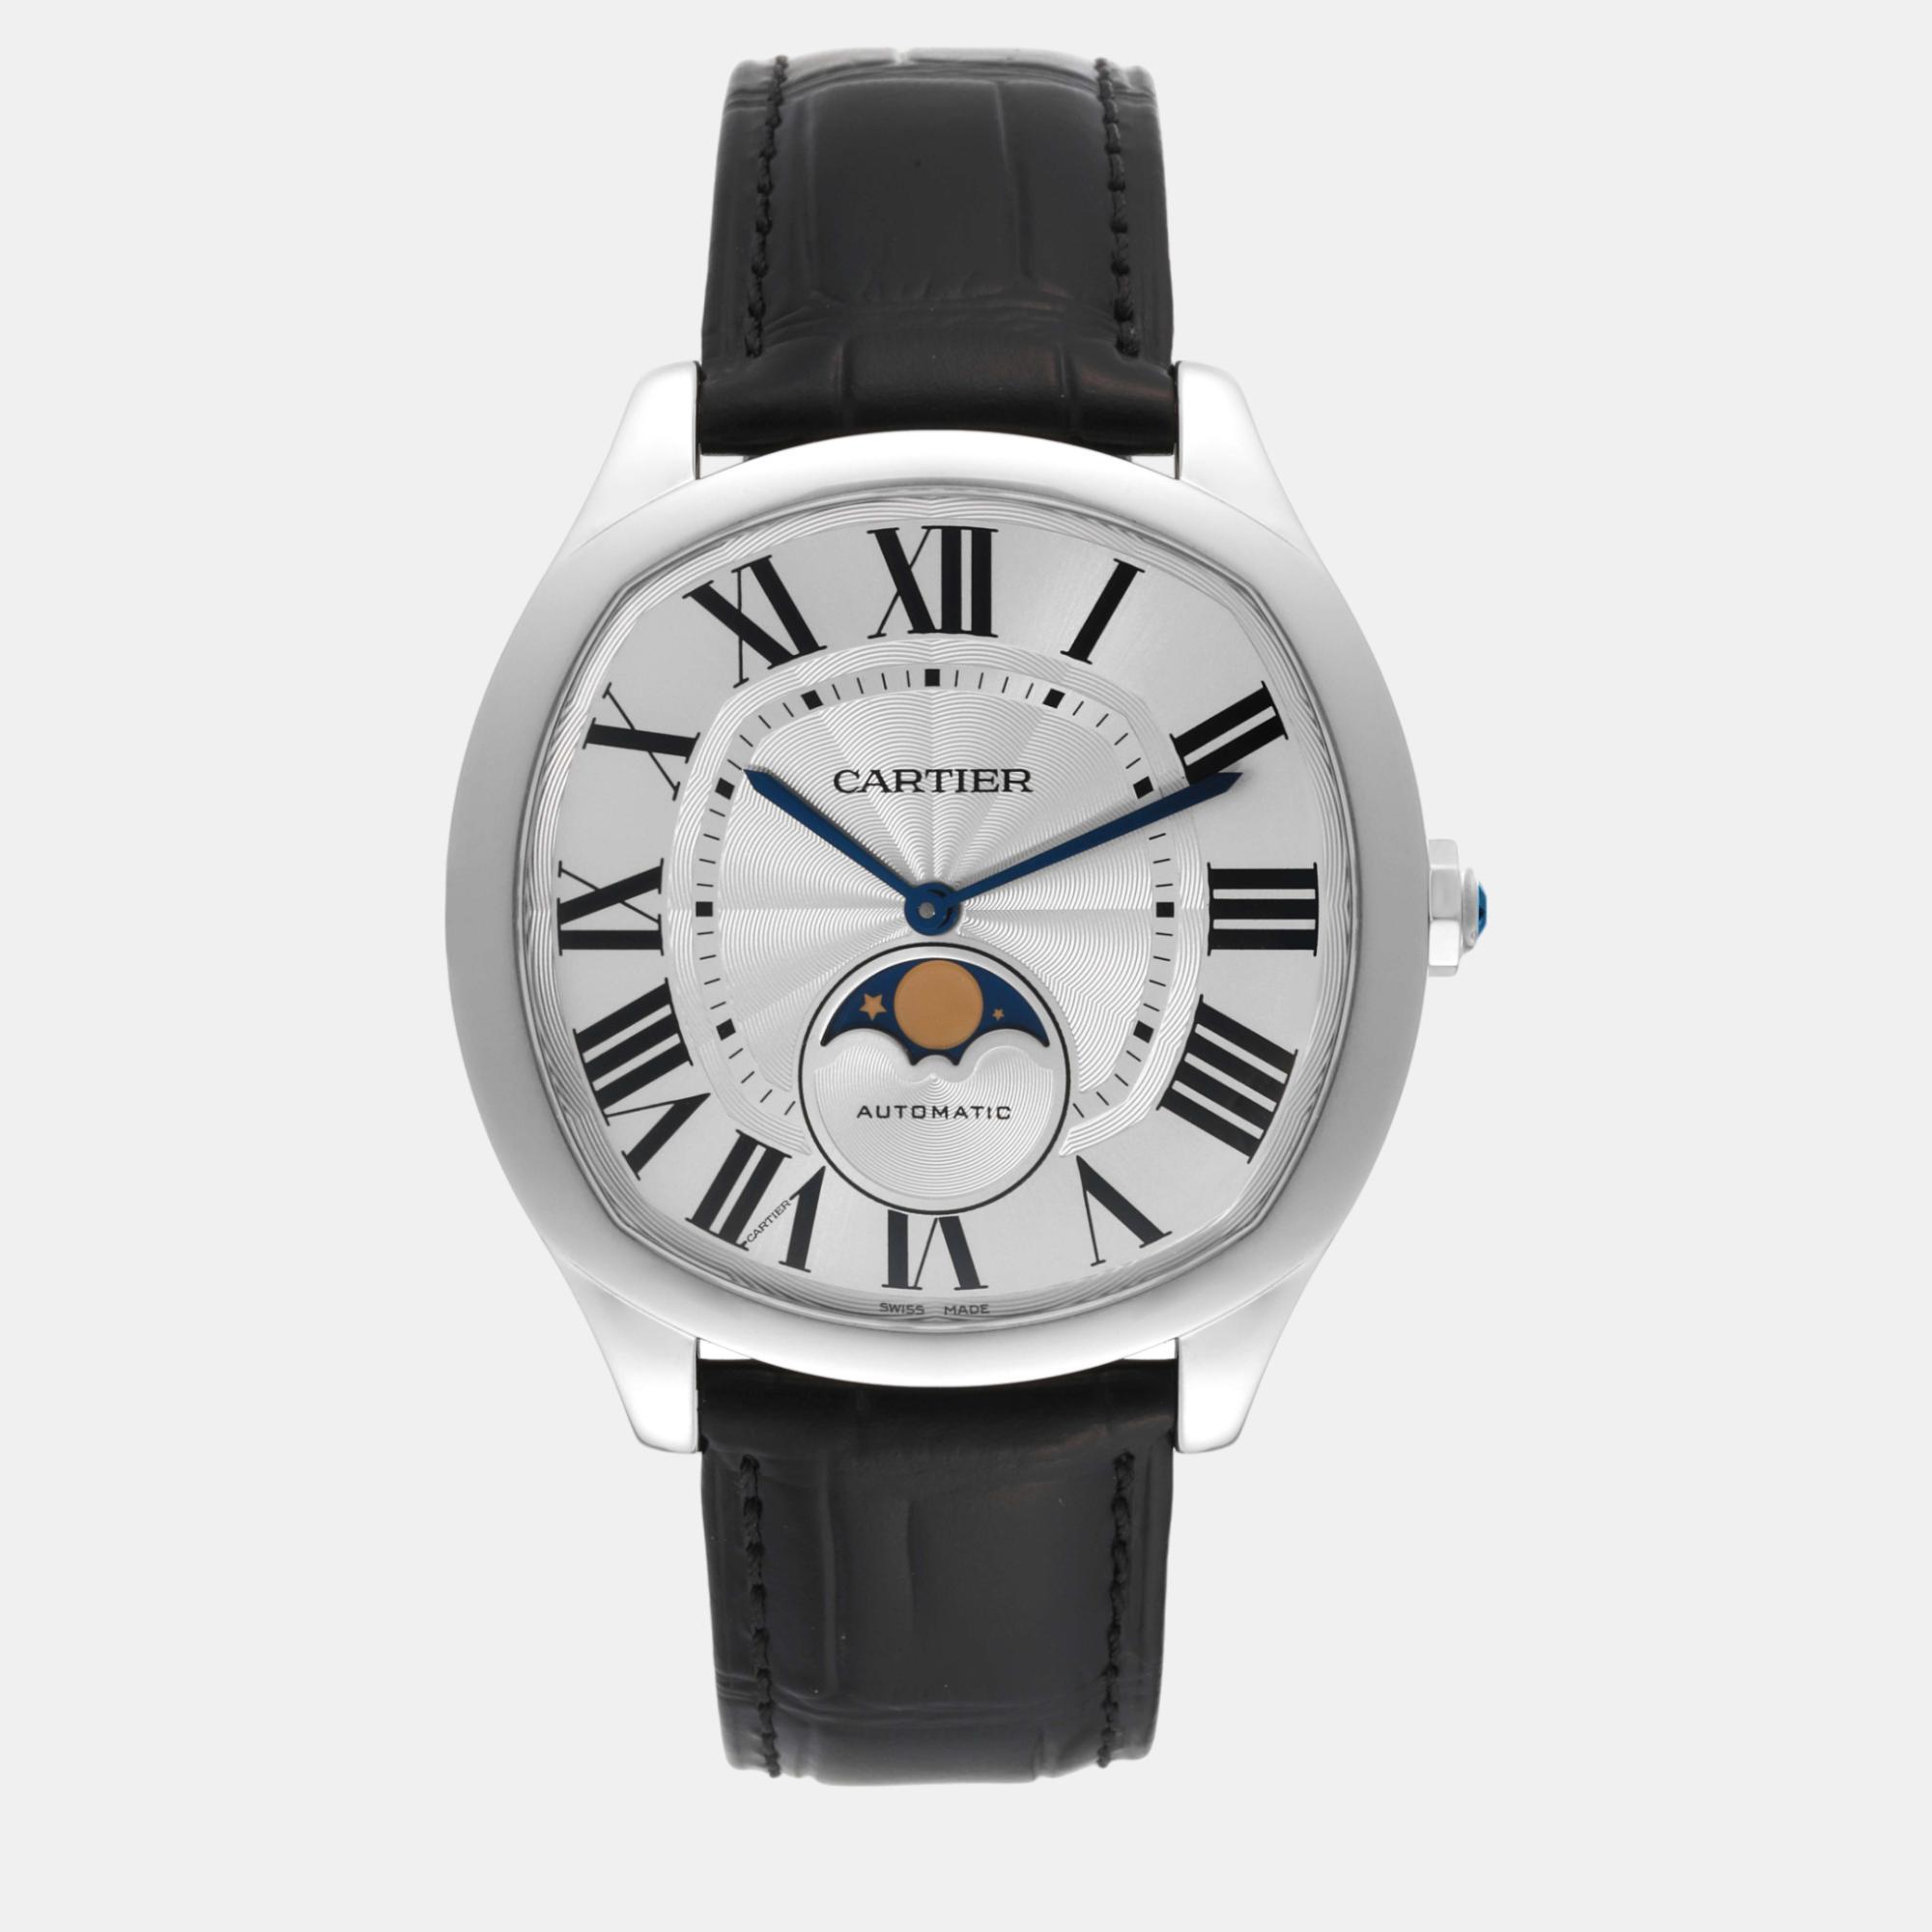 This authentic Cartier watch is characterized by skillful craftsmanship and understated charm. Meticulously constructed to tell time in an elegant way it comes in a sturdy case and flaunts a seamless blend of innovative design and flawless style.